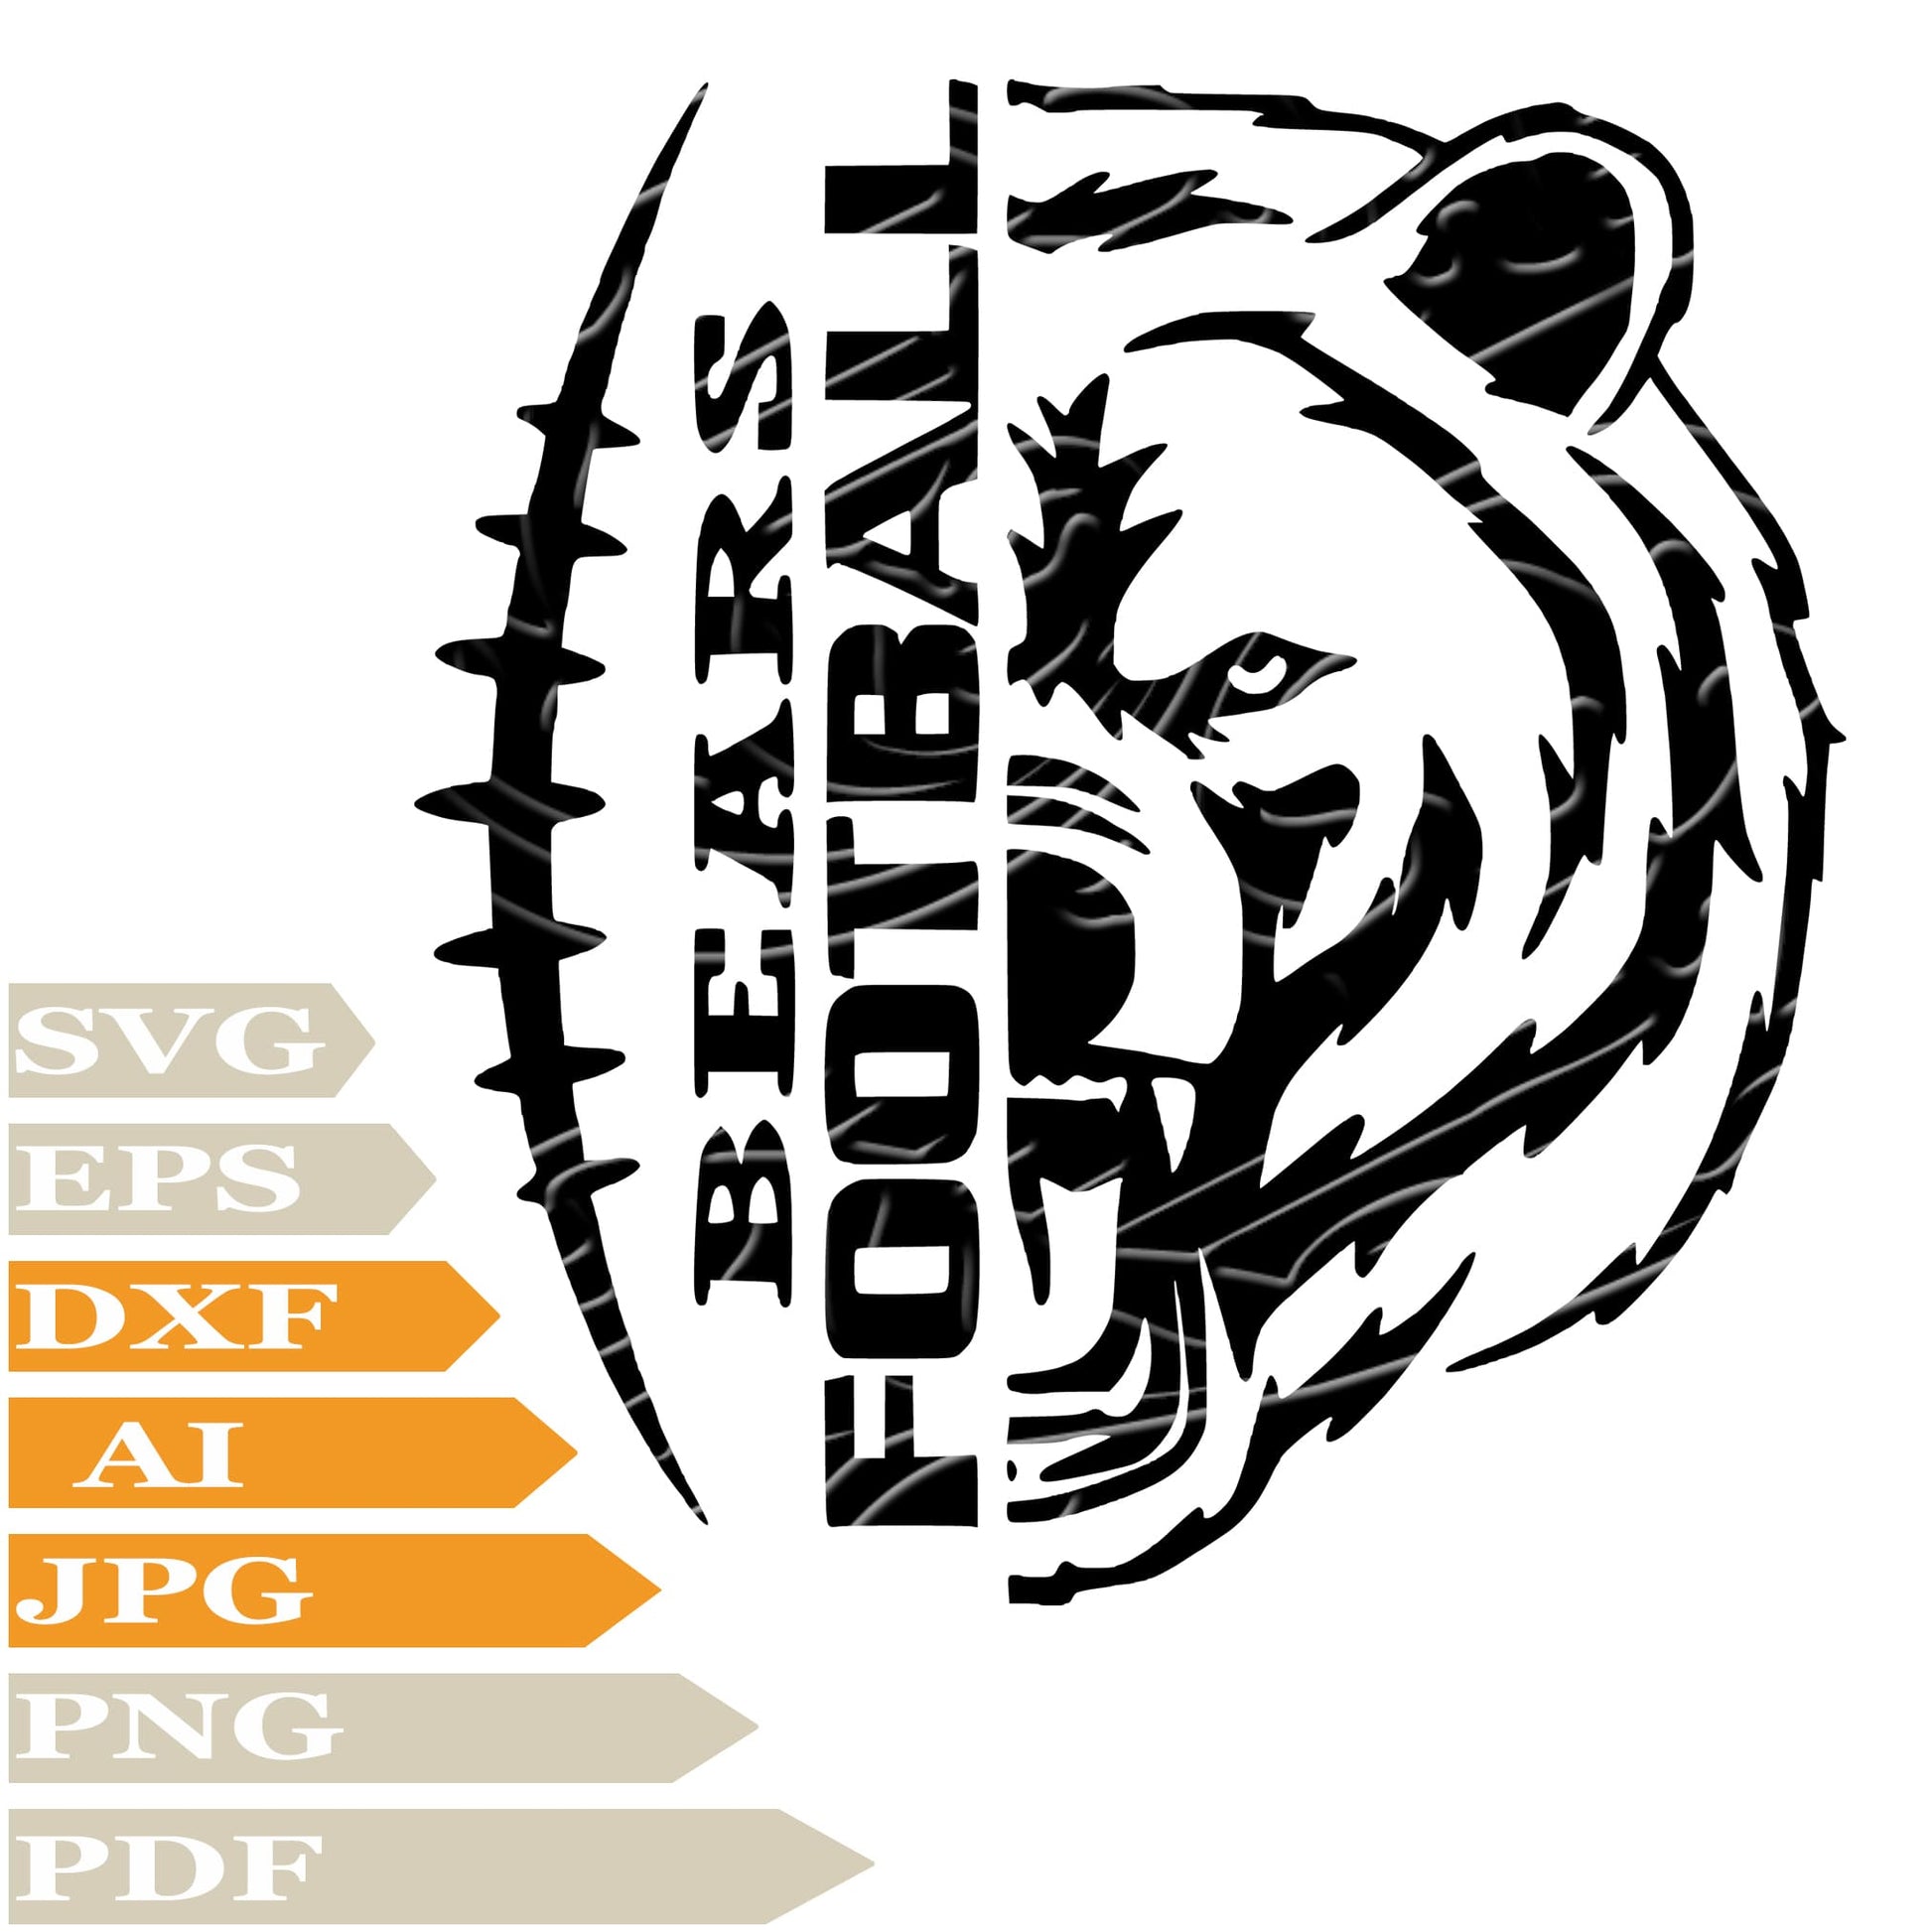 Bears Football, Chicago Bears Logo Svg File, Image Cut, Png, For Tattoo, Silhouette, Digital Vector Download, Cut File, Clipart, For Cricut